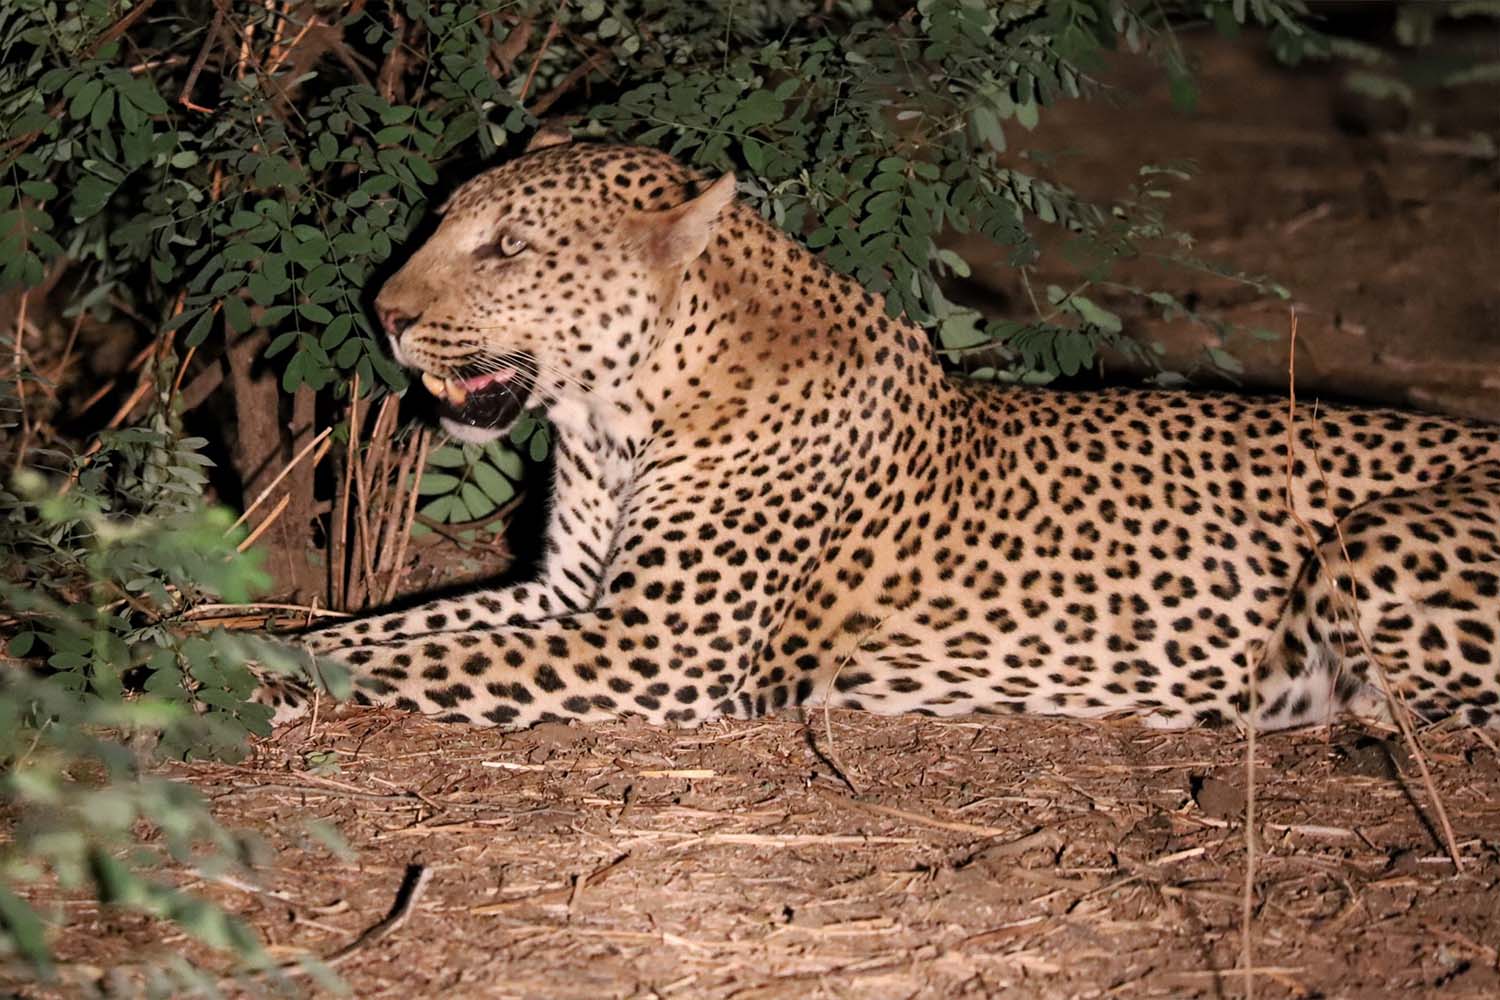 A leopard may take a casual moonlit stroll a hundred feet from your dining table